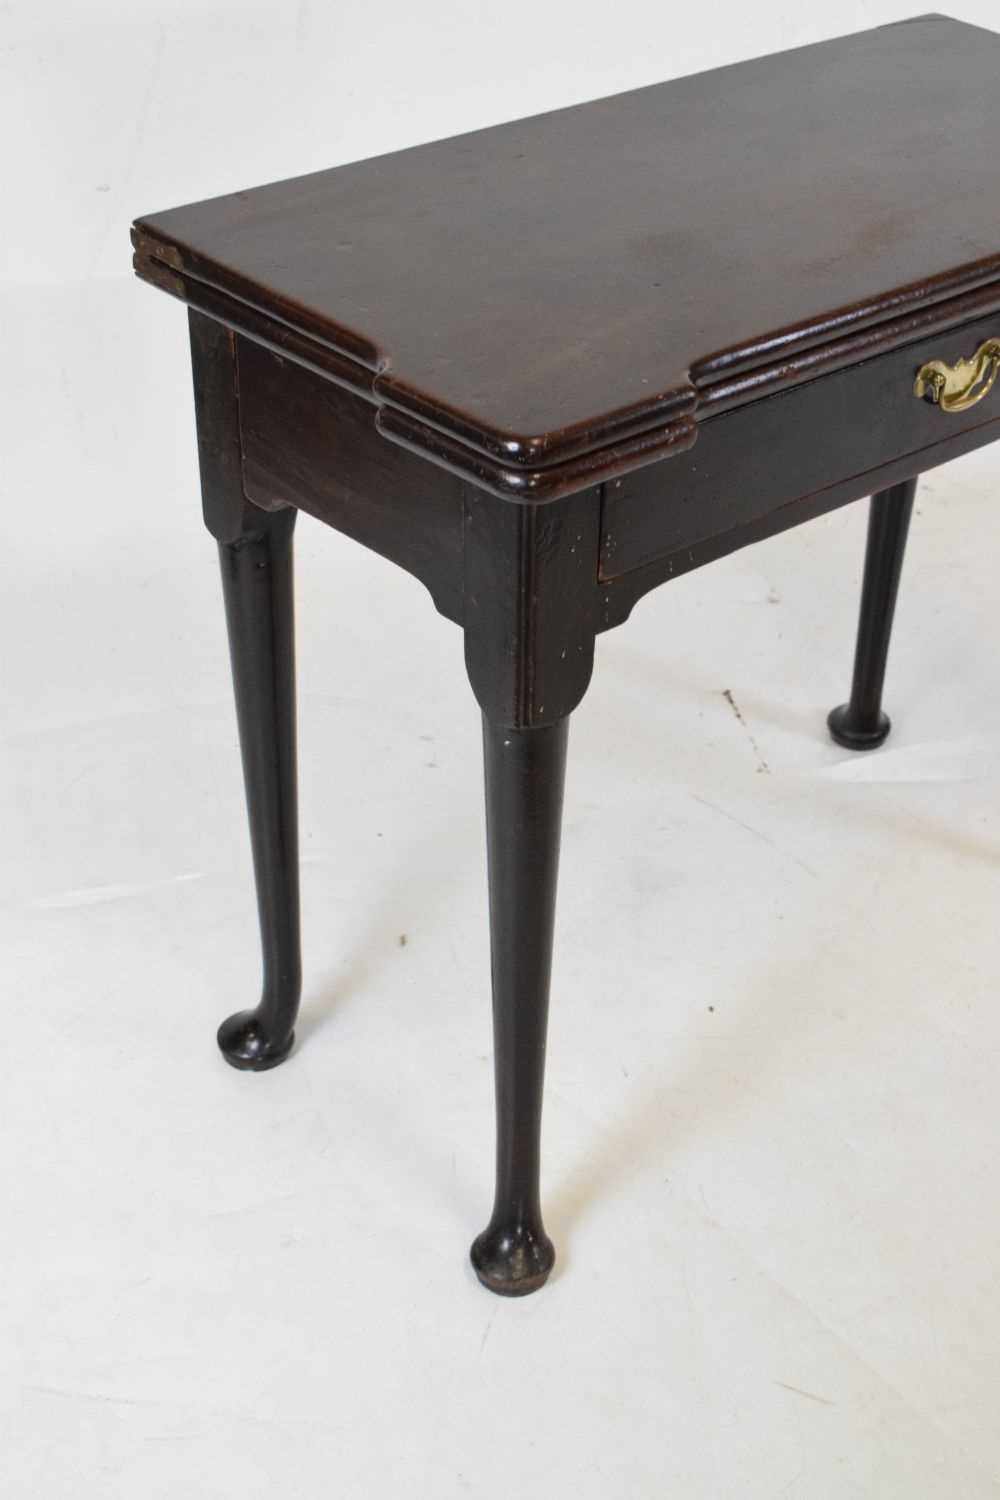 Mid 18th Century 'red walnut' fold-over tea table - Image 3 of 5